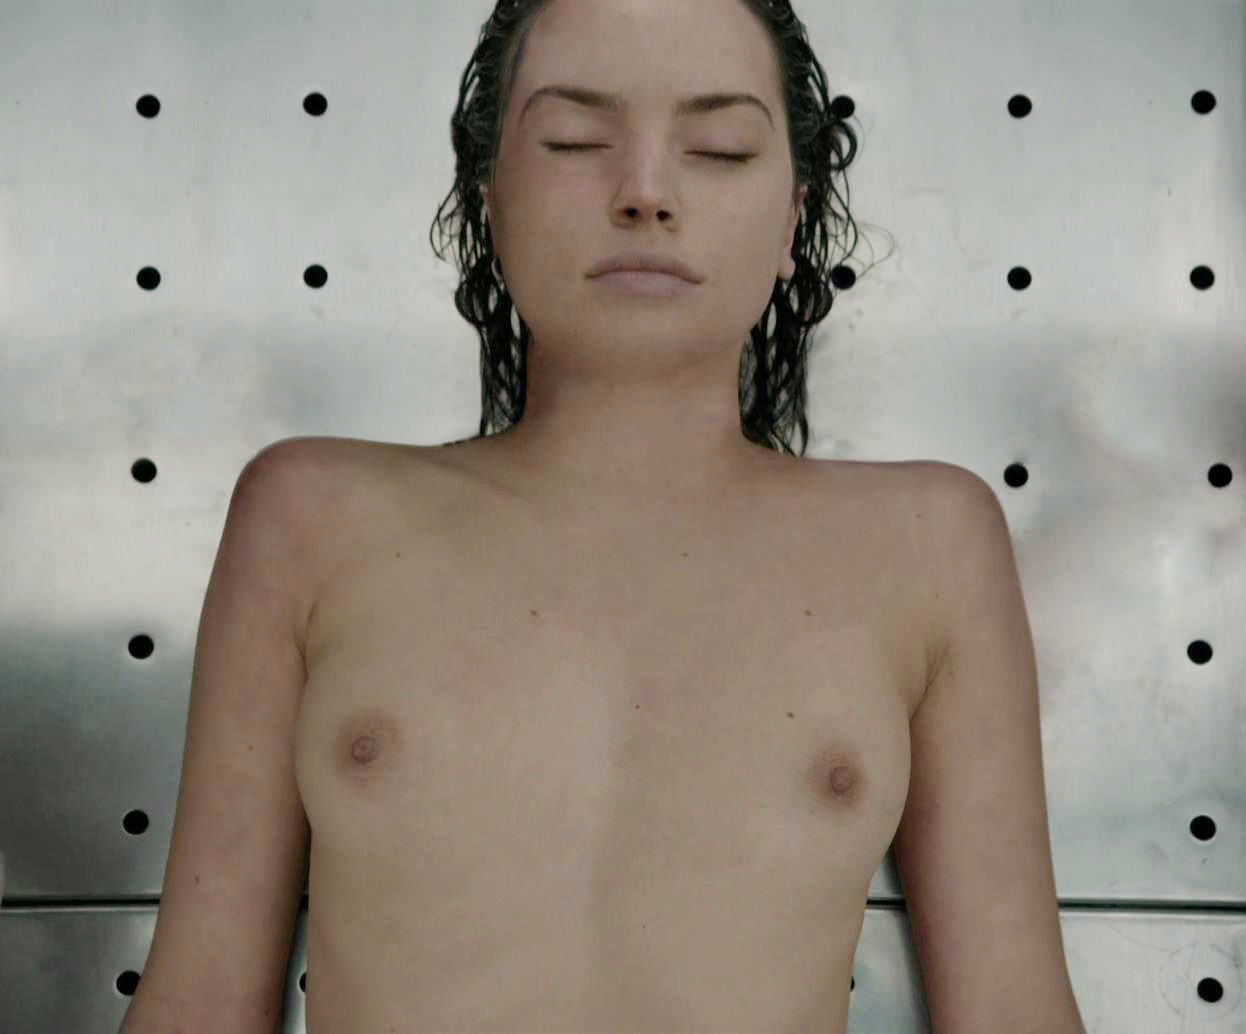 christopher appling recommends daisy ridley nude scene pic